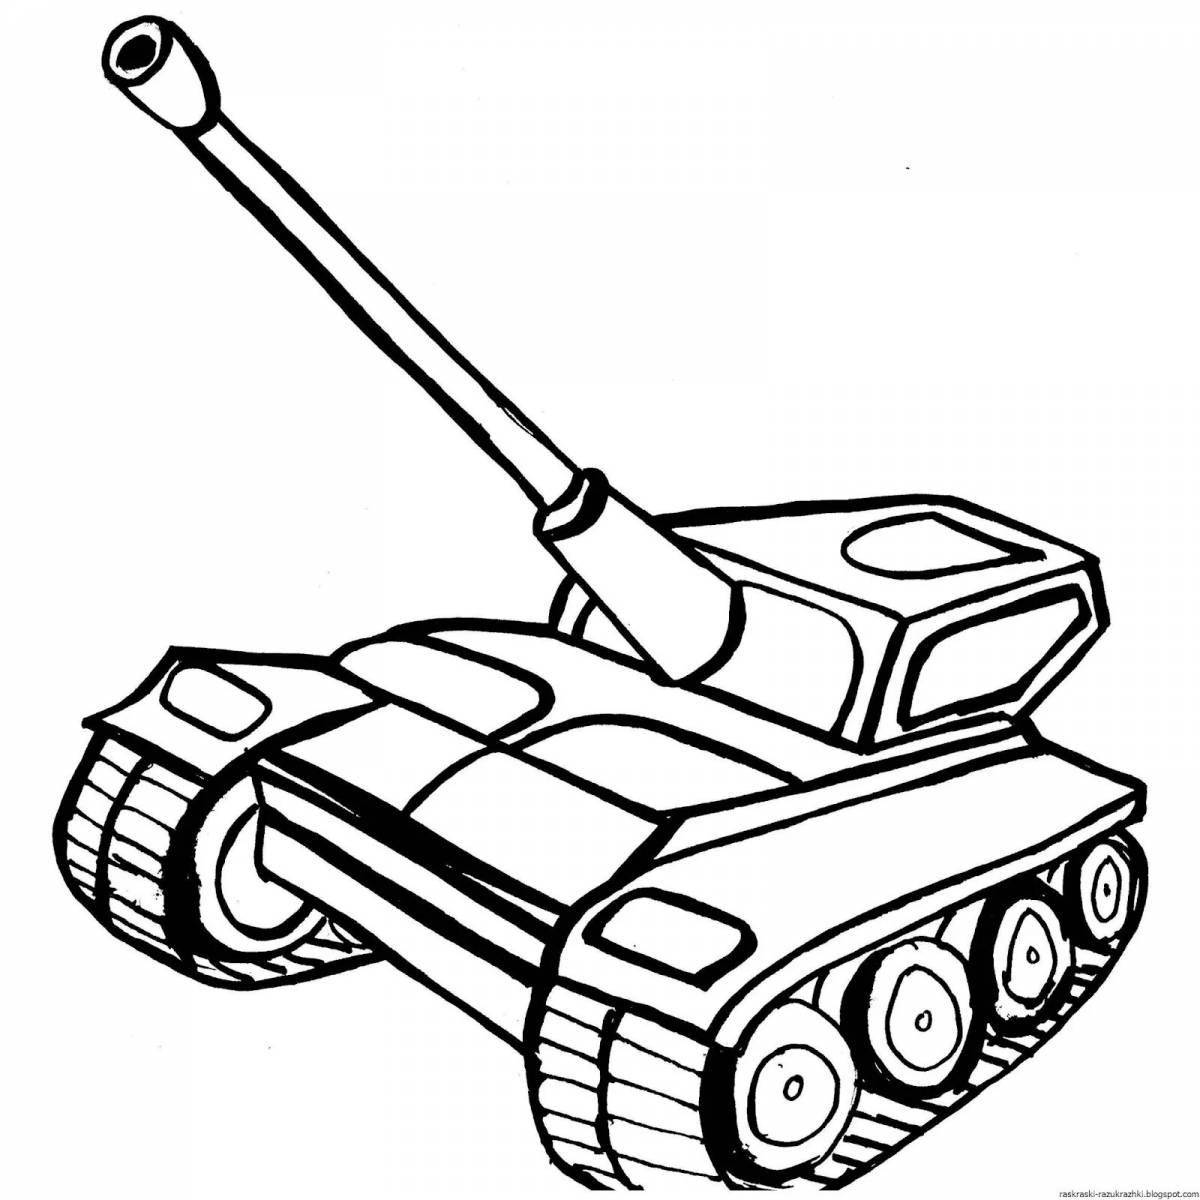 Tank drawing for kids #17